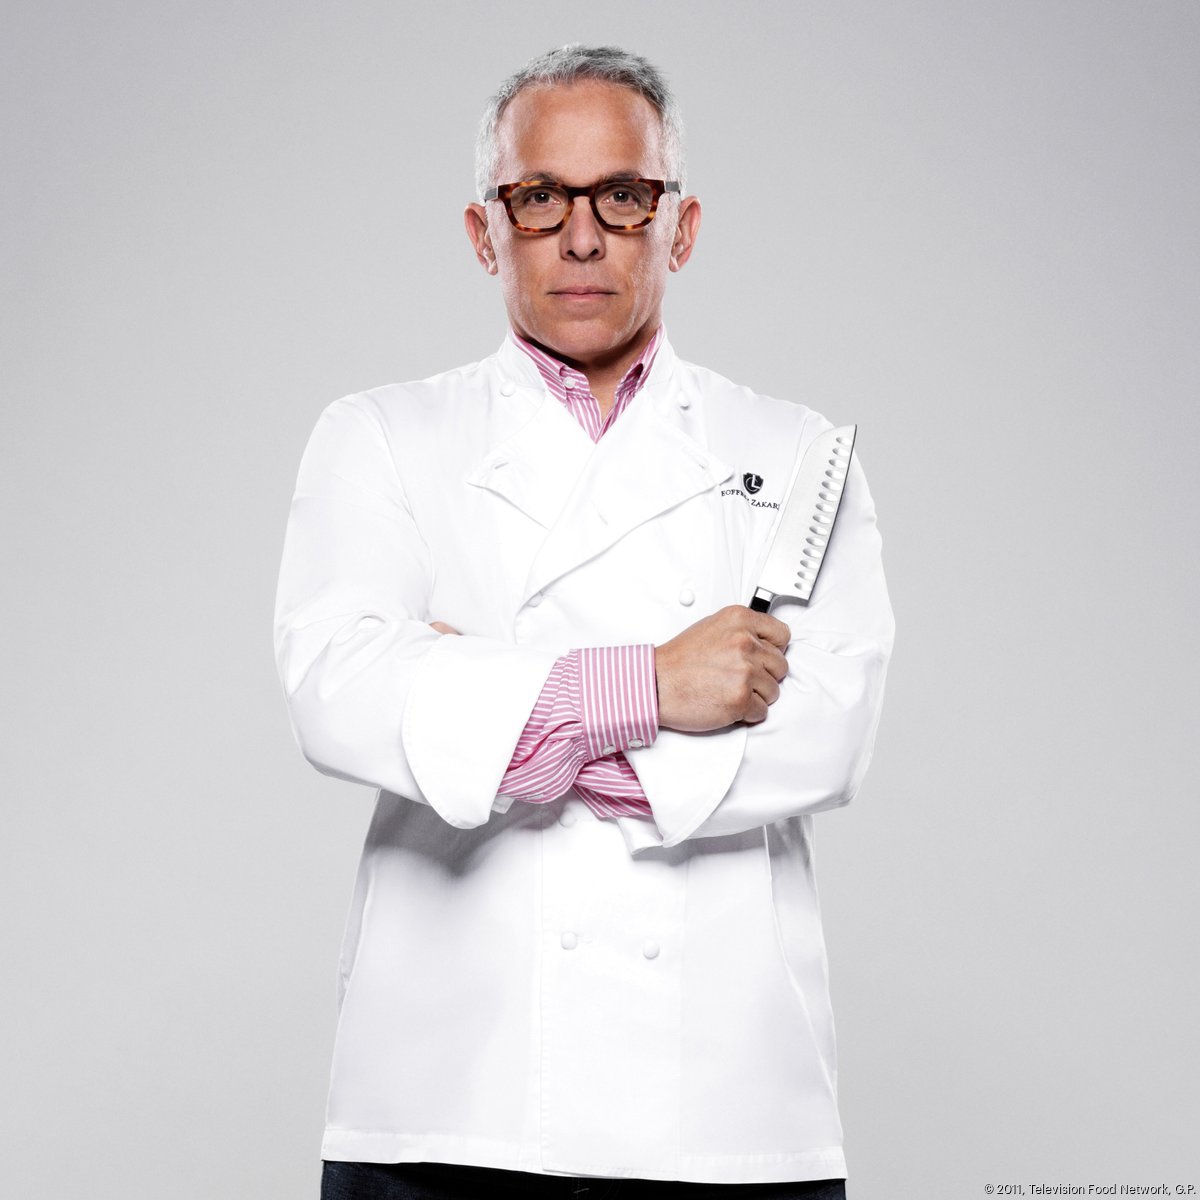 Chef Geoffrey Zakarian opens new eatery while facing Trump lawsuit